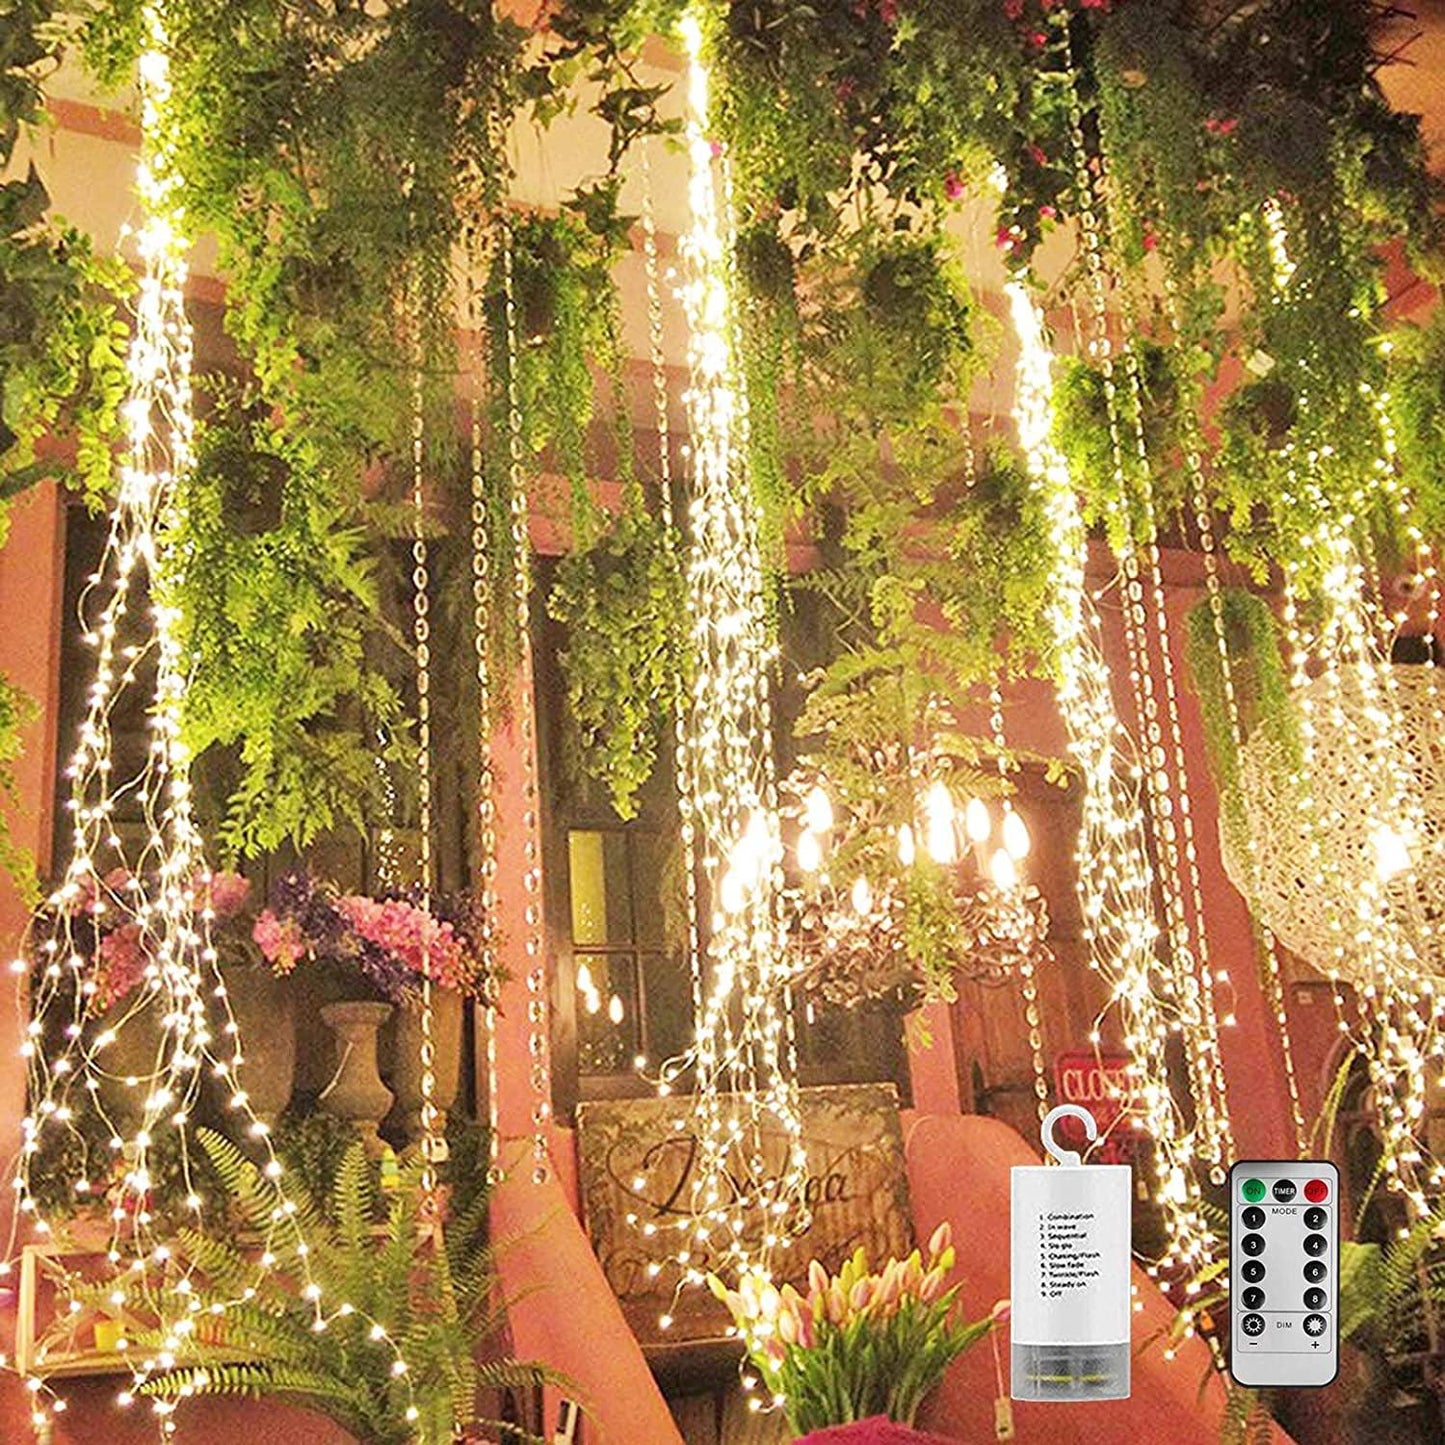 LED Firefly Bunch Lights - If you say i do